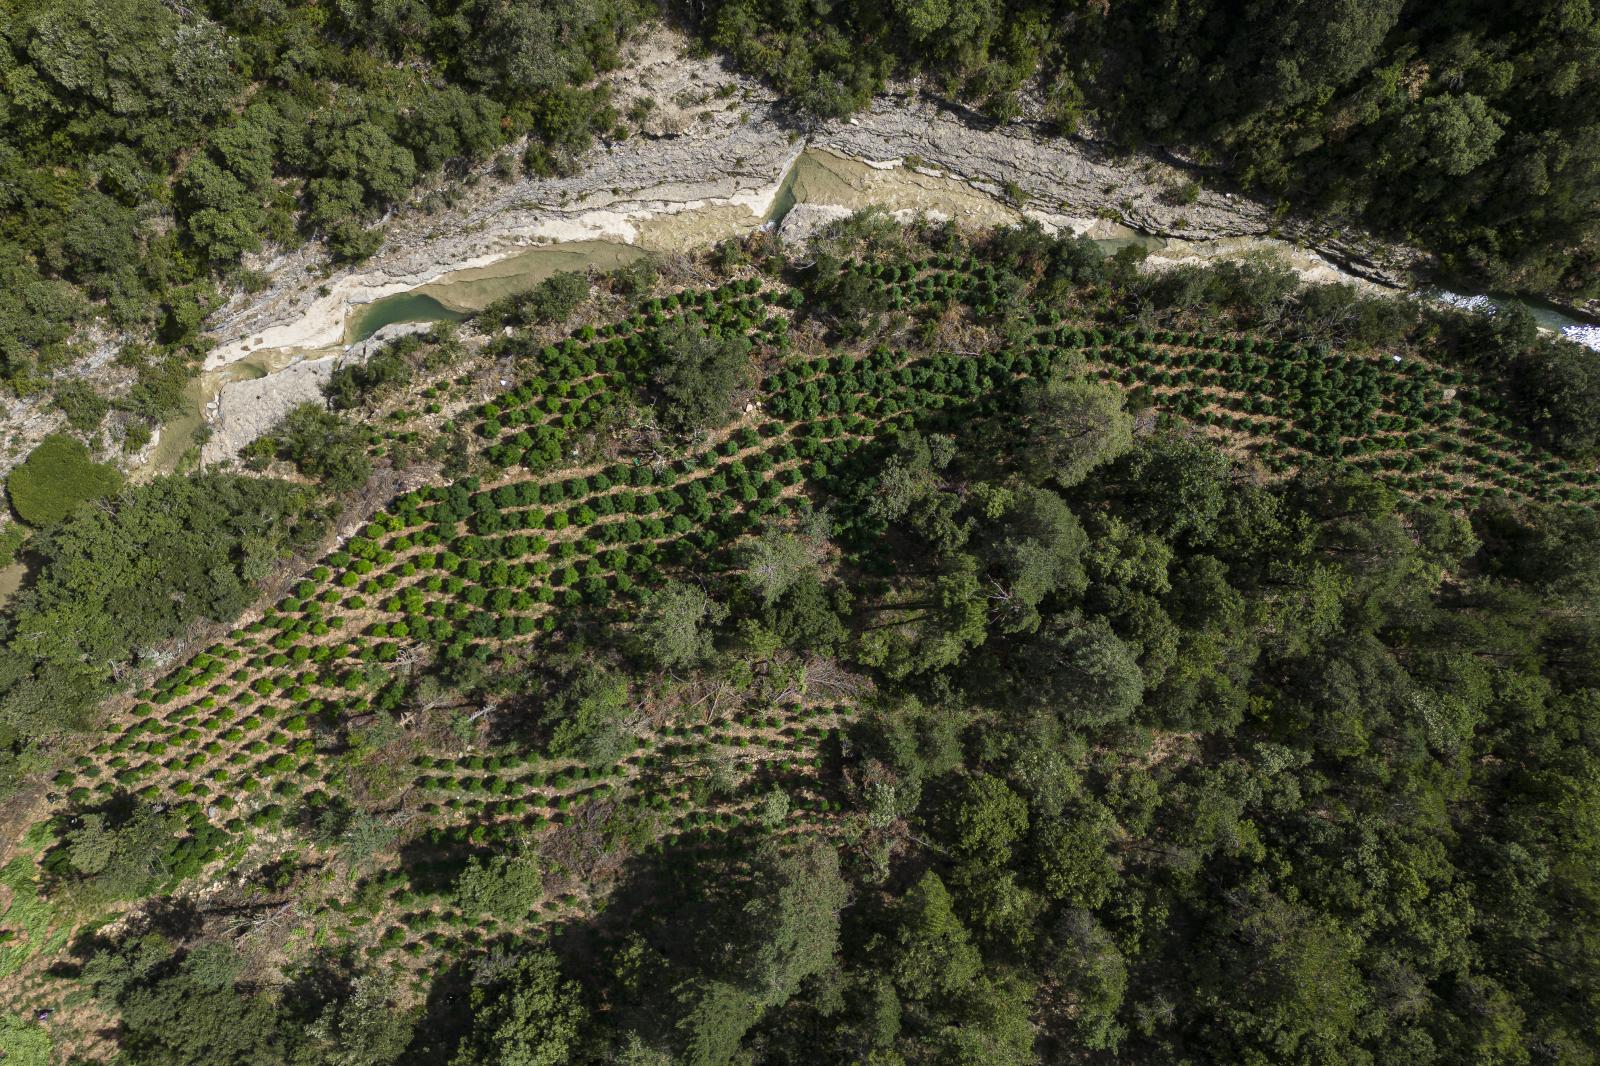 Image from DAILY NEWS - Aerial image of the deforested forest area where trees...